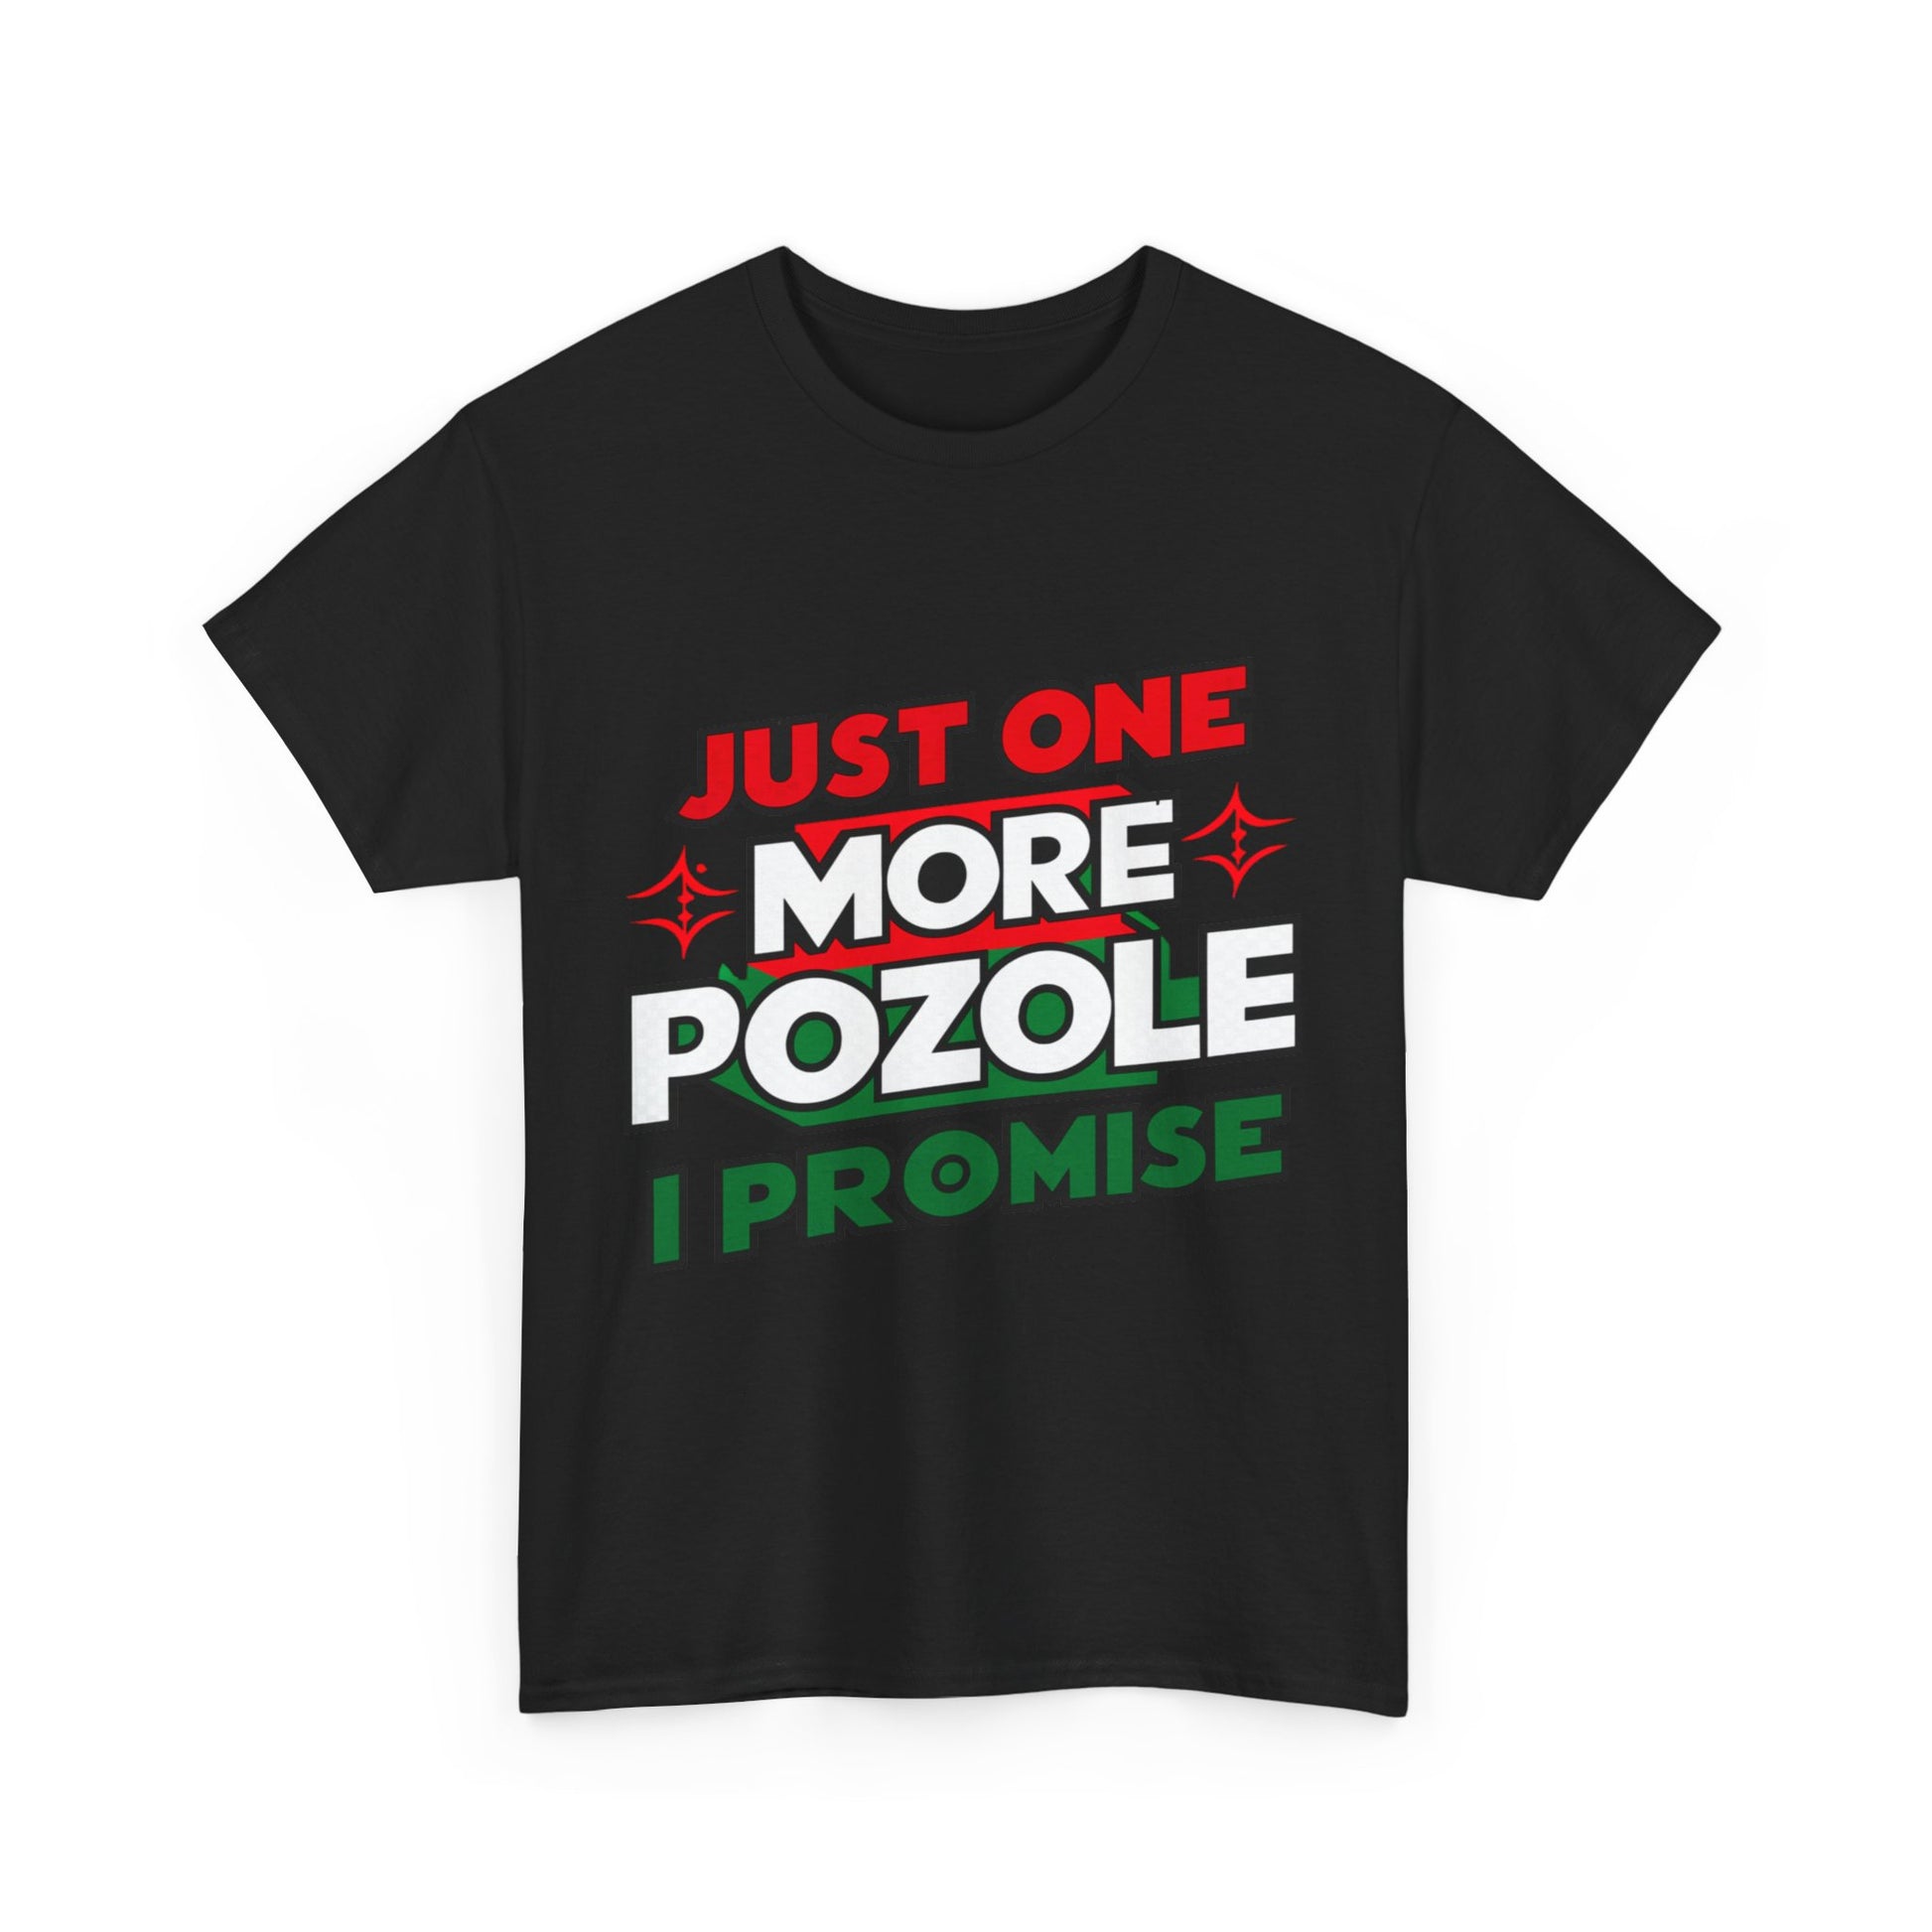 Just One More Pozole I Promise Mexican Food Graphic Unisex Heavy Cotton Tee Cotton Funny Humorous Graphic Soft Premium Unisex Men Women Black T-shirt Birthday Gift-15